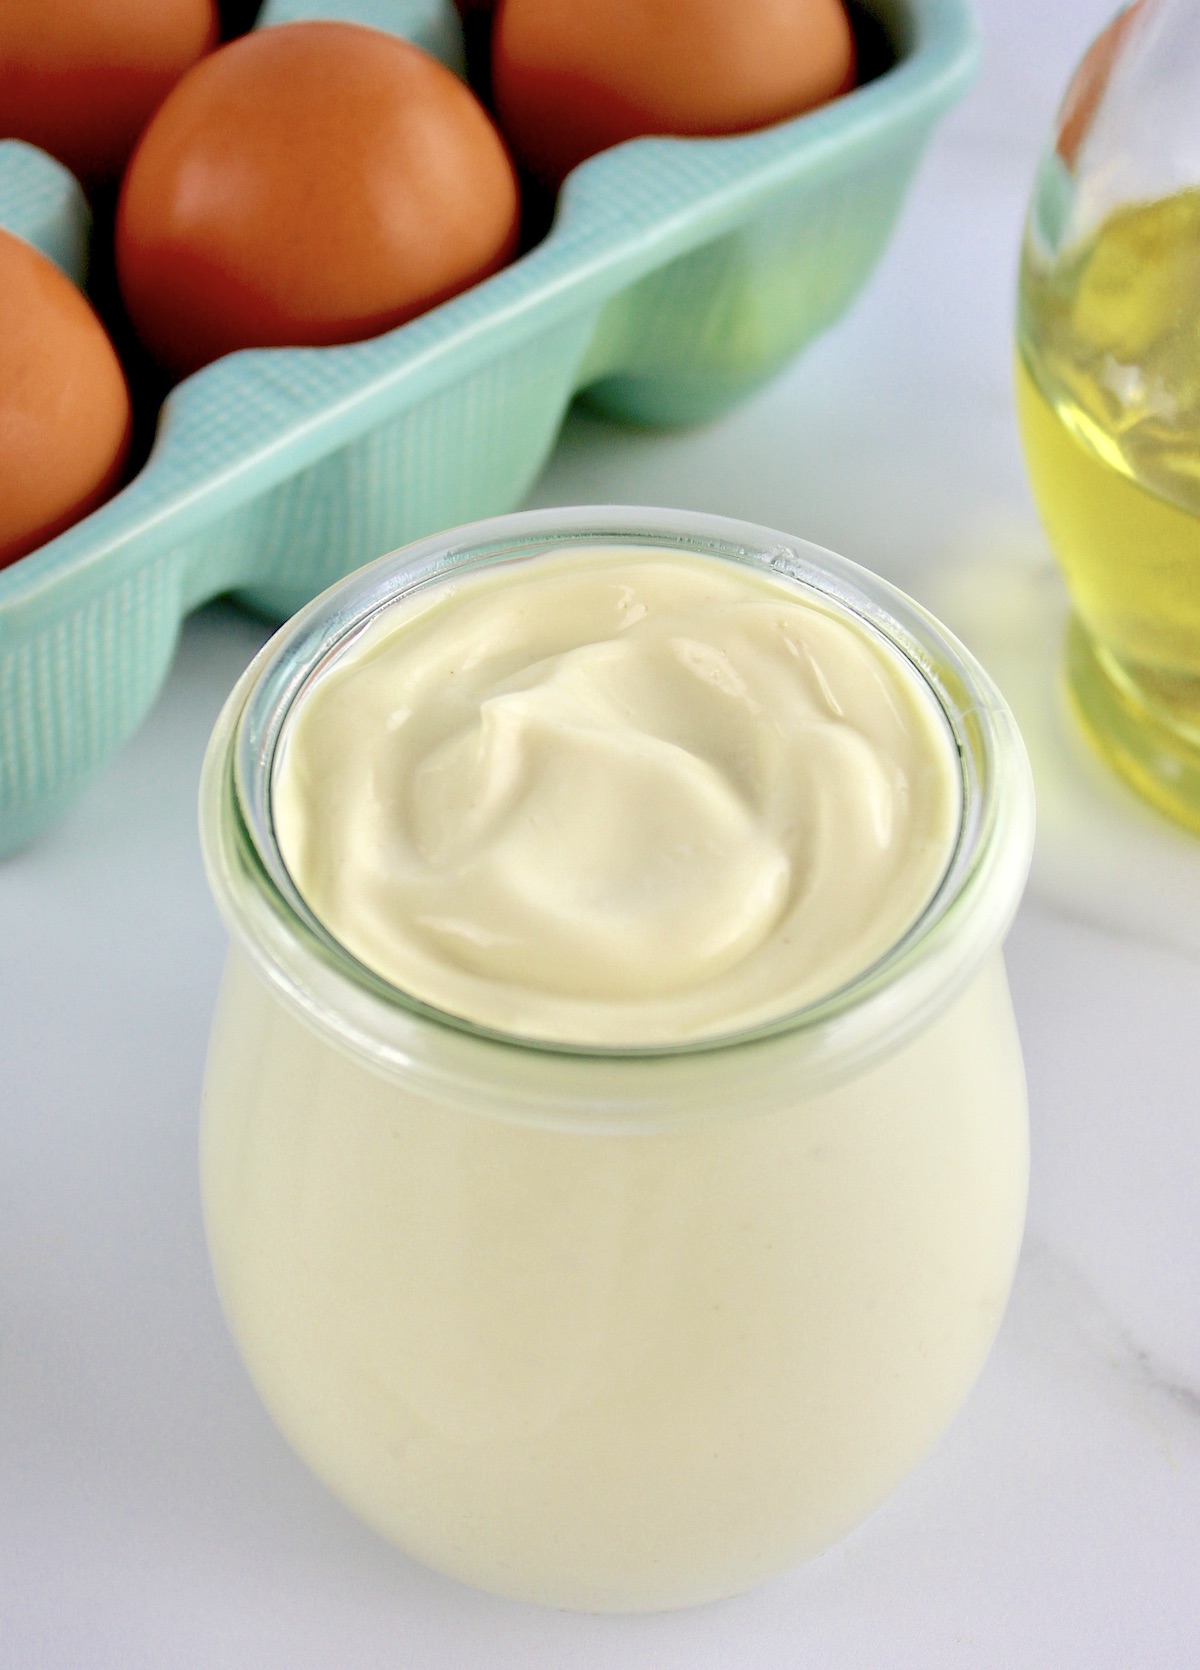 Easy Homemade Keto Mayonnaise in open glass jar with eggs and oil in background